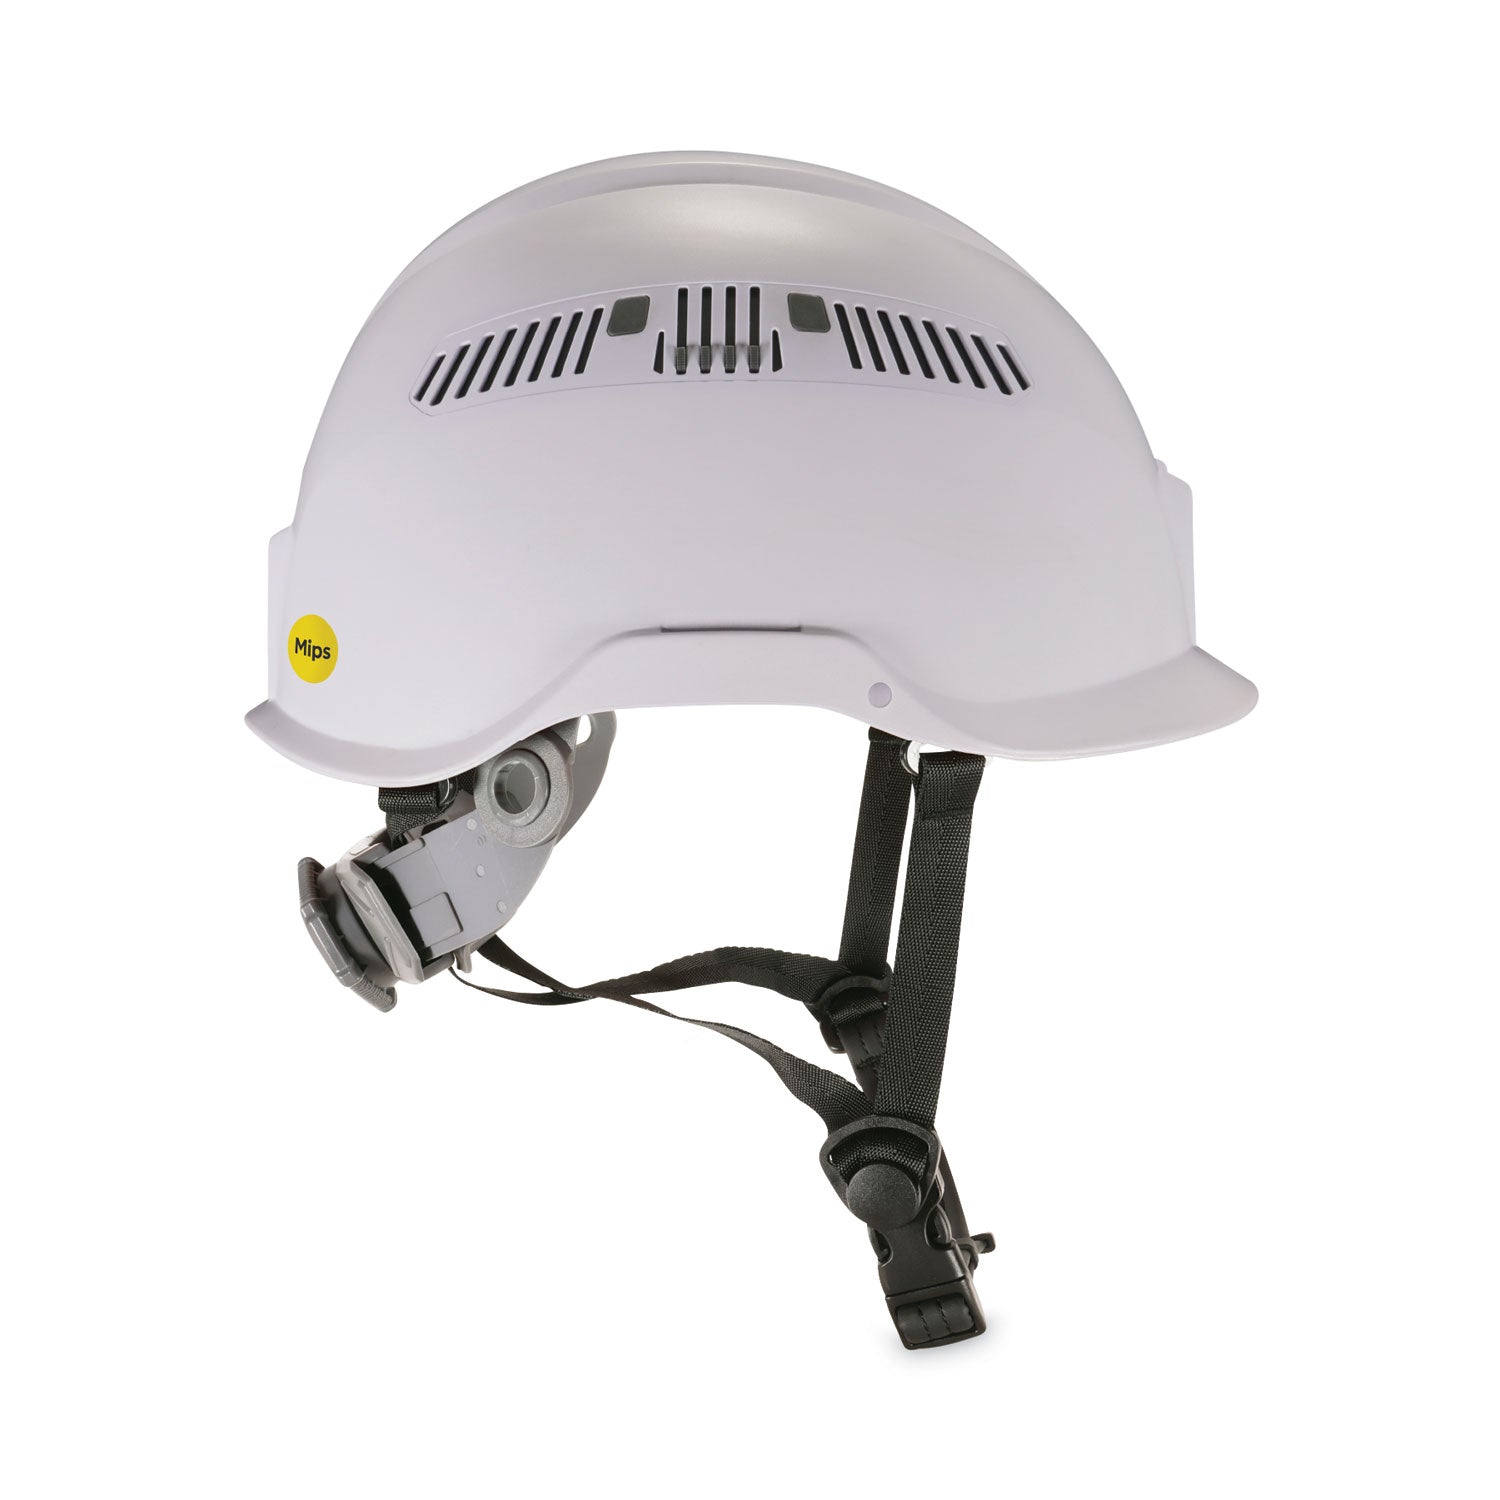 skullerz-8975-mips-class-c-safety-helmet-with-mips-elevate-ratchet-suspension-white-ships-in-1-3-business-days_ego60256 - 1